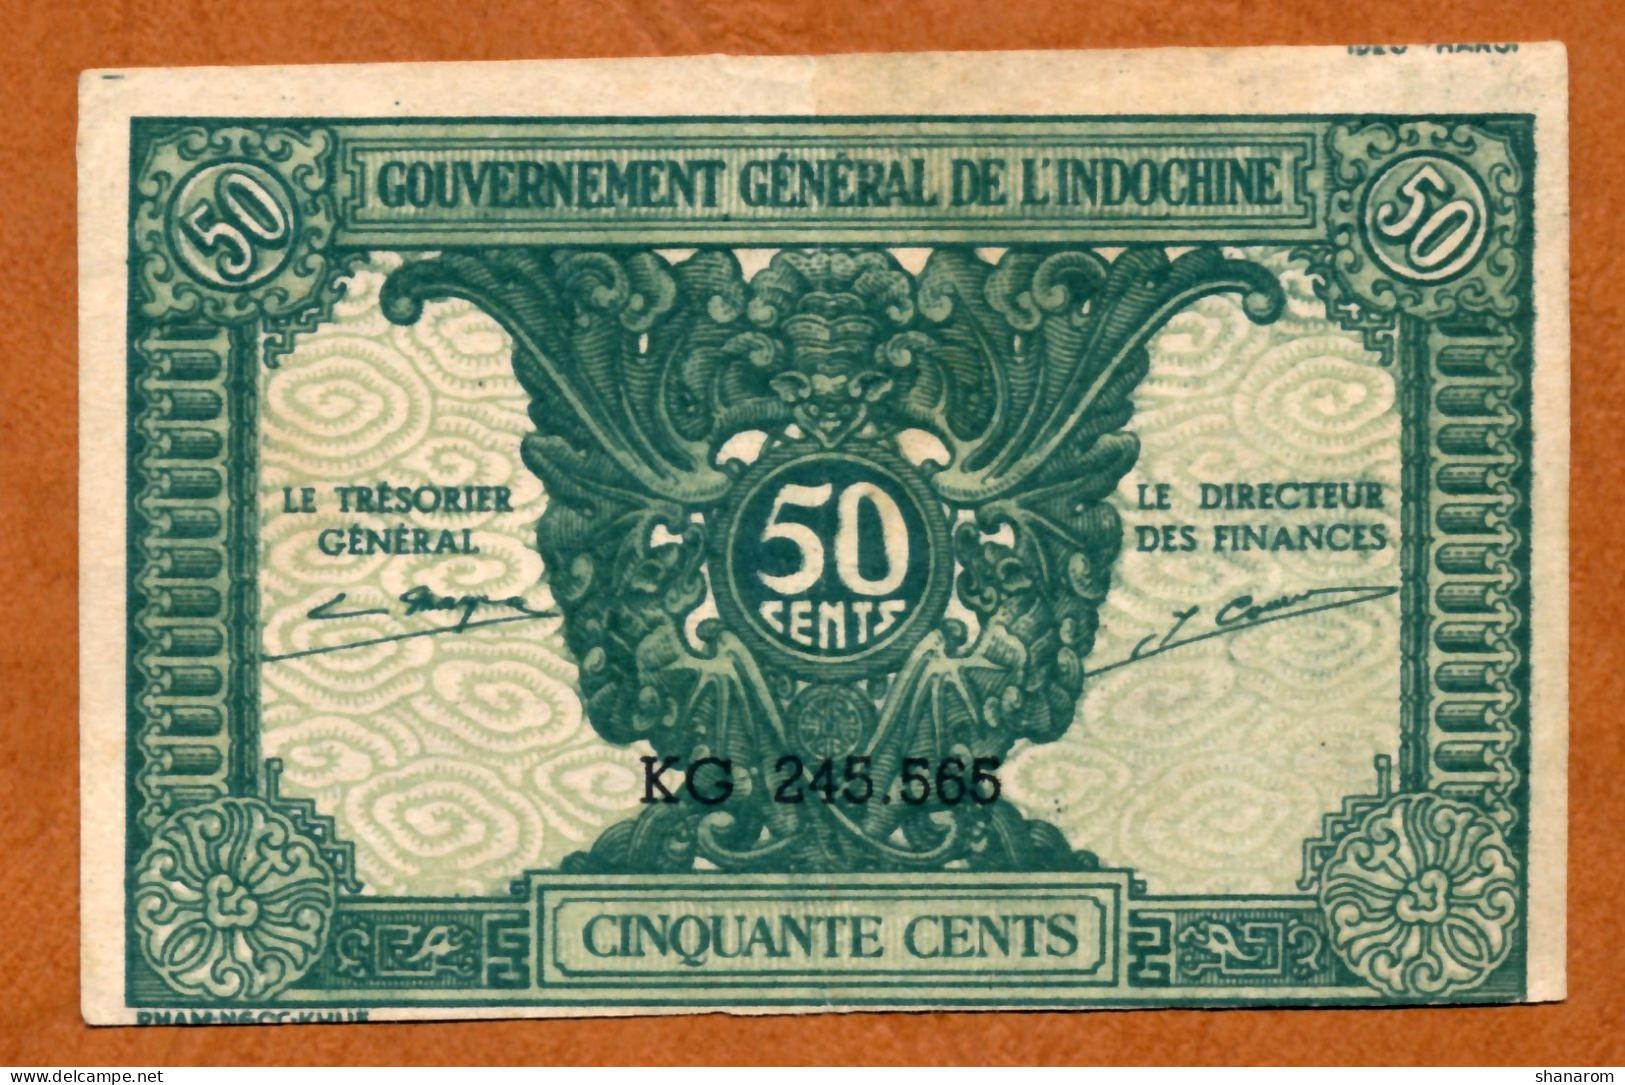 1943 // INDOCHINE // GOUVERNEMENT GENERAL // Cinquante Cents // SUP // XF - Indochine